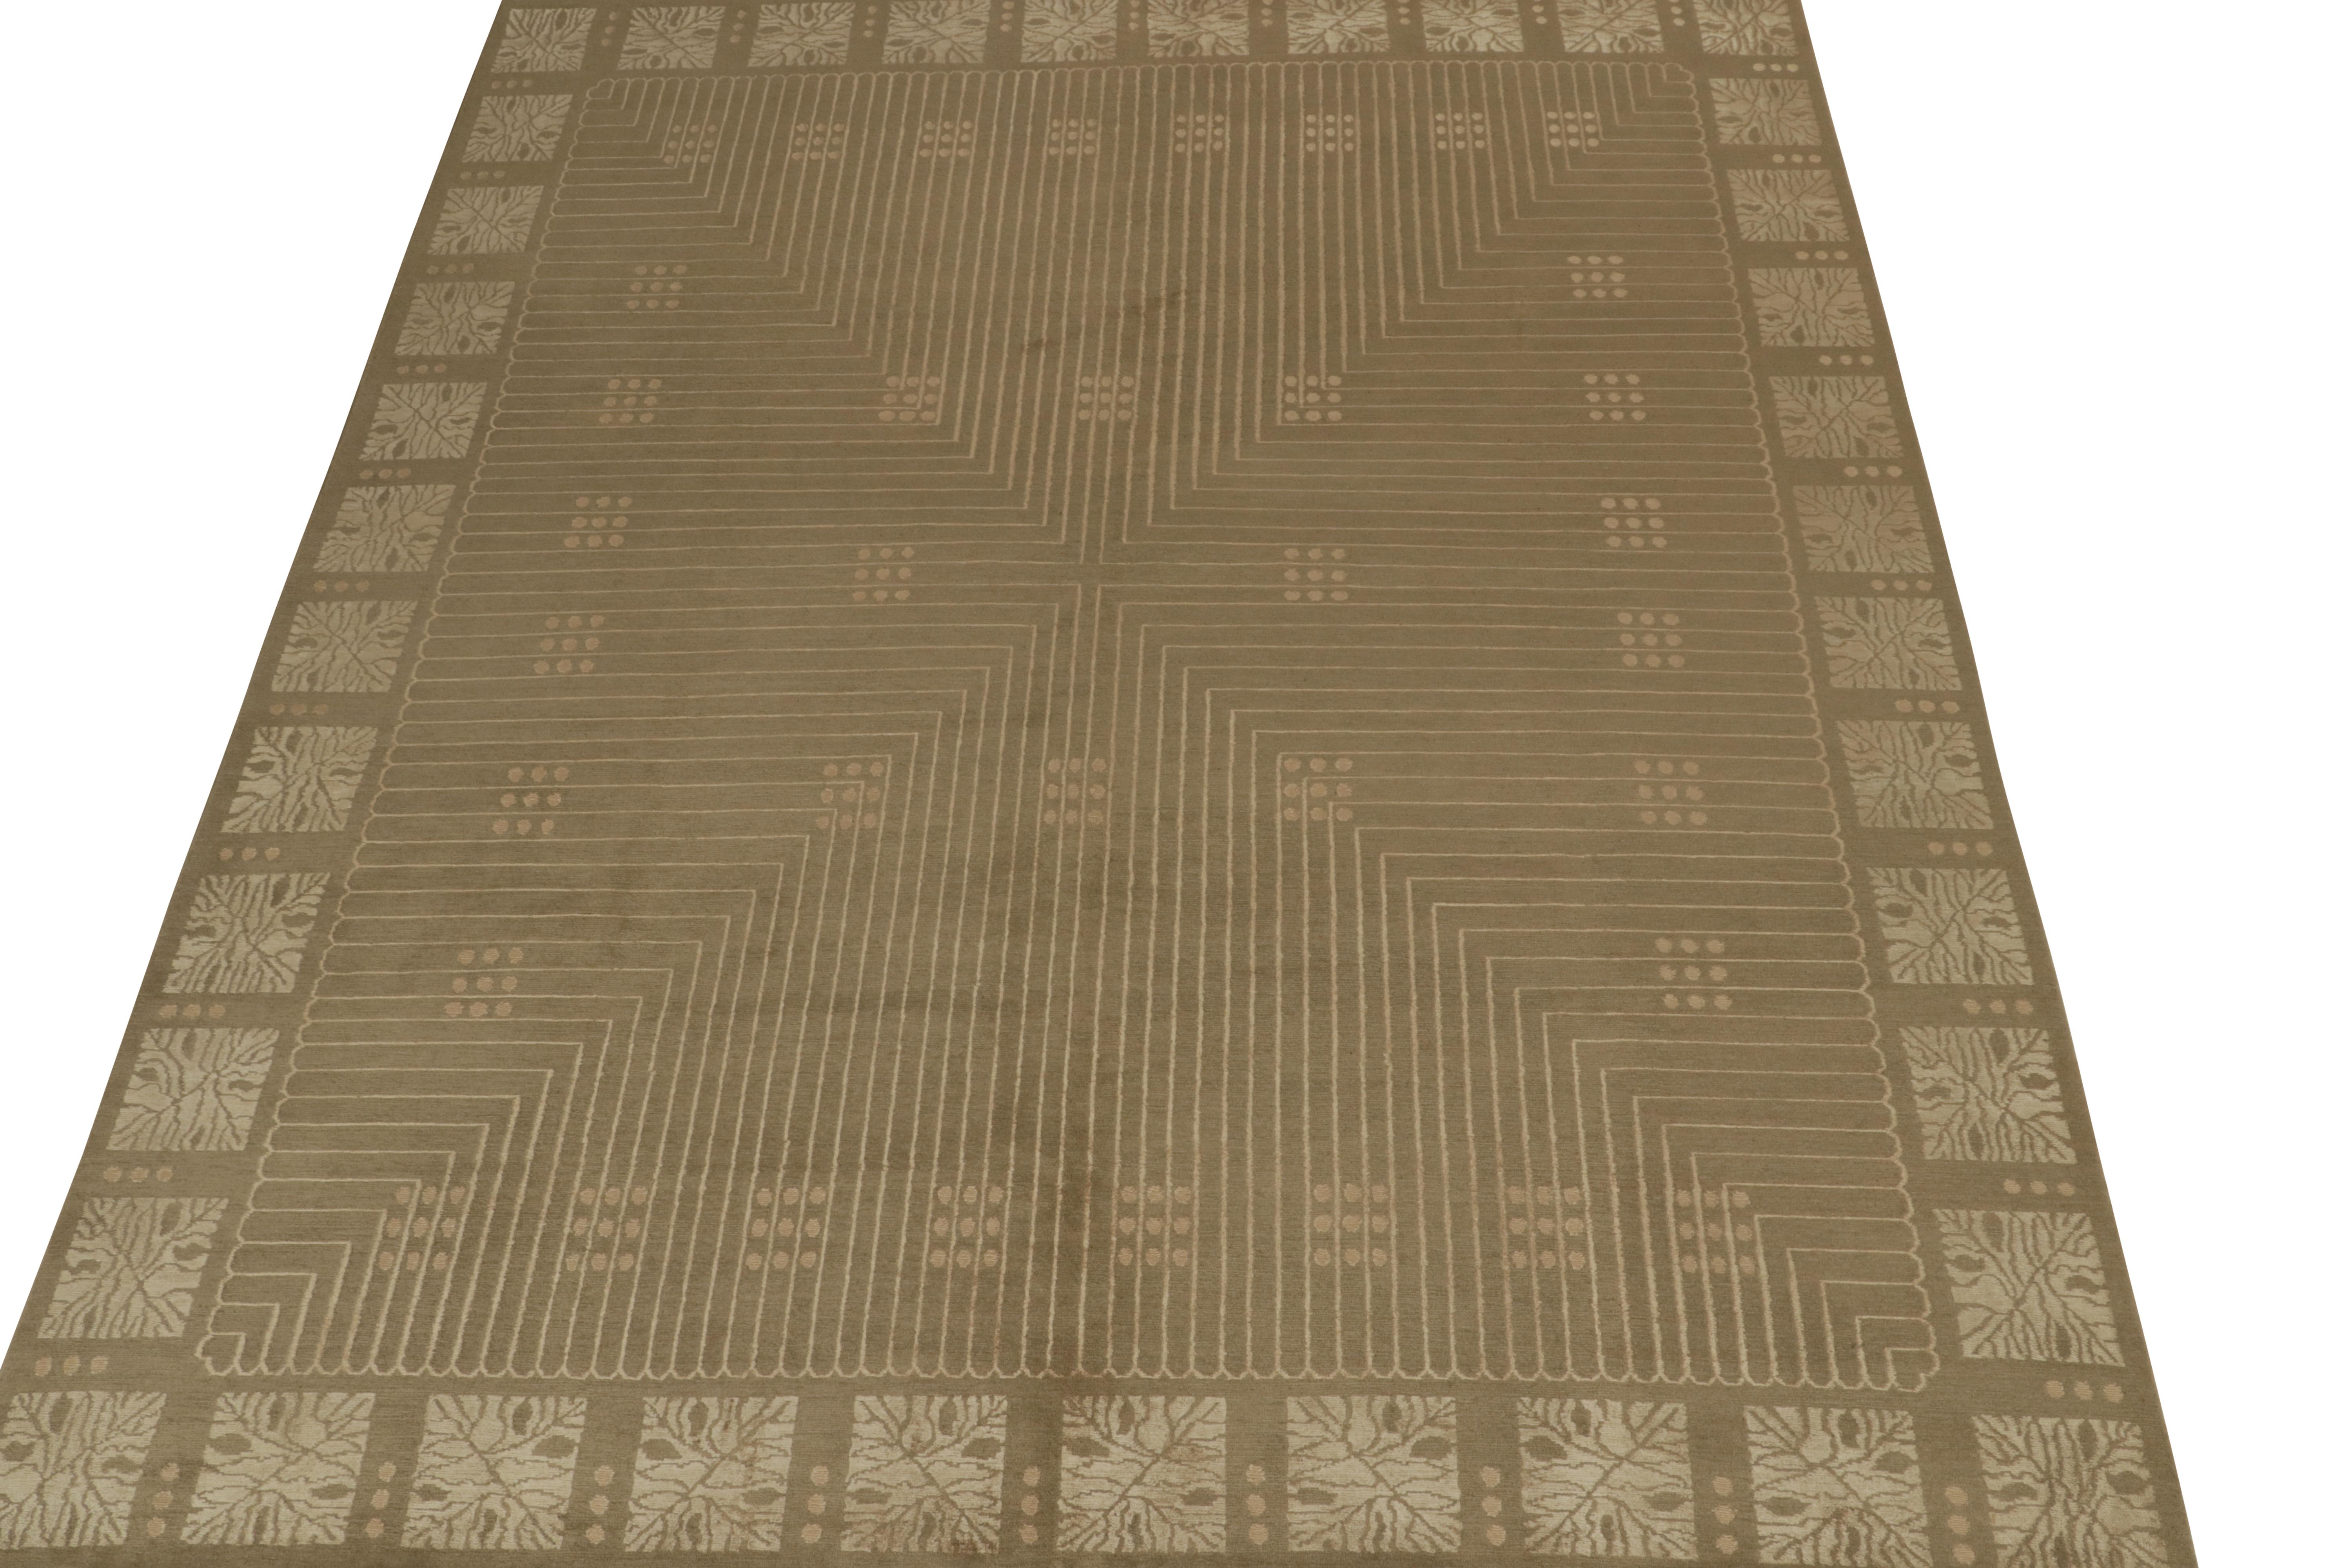 This 8x10 Art Deco rug is a bold new addition to the titular collection by Rug & Kilim. 

Further on the Design: 

This particular rug is hand-knotted in wool and all-natural silk, and its design recaptures the Austrian Deco style. Keen eyes will